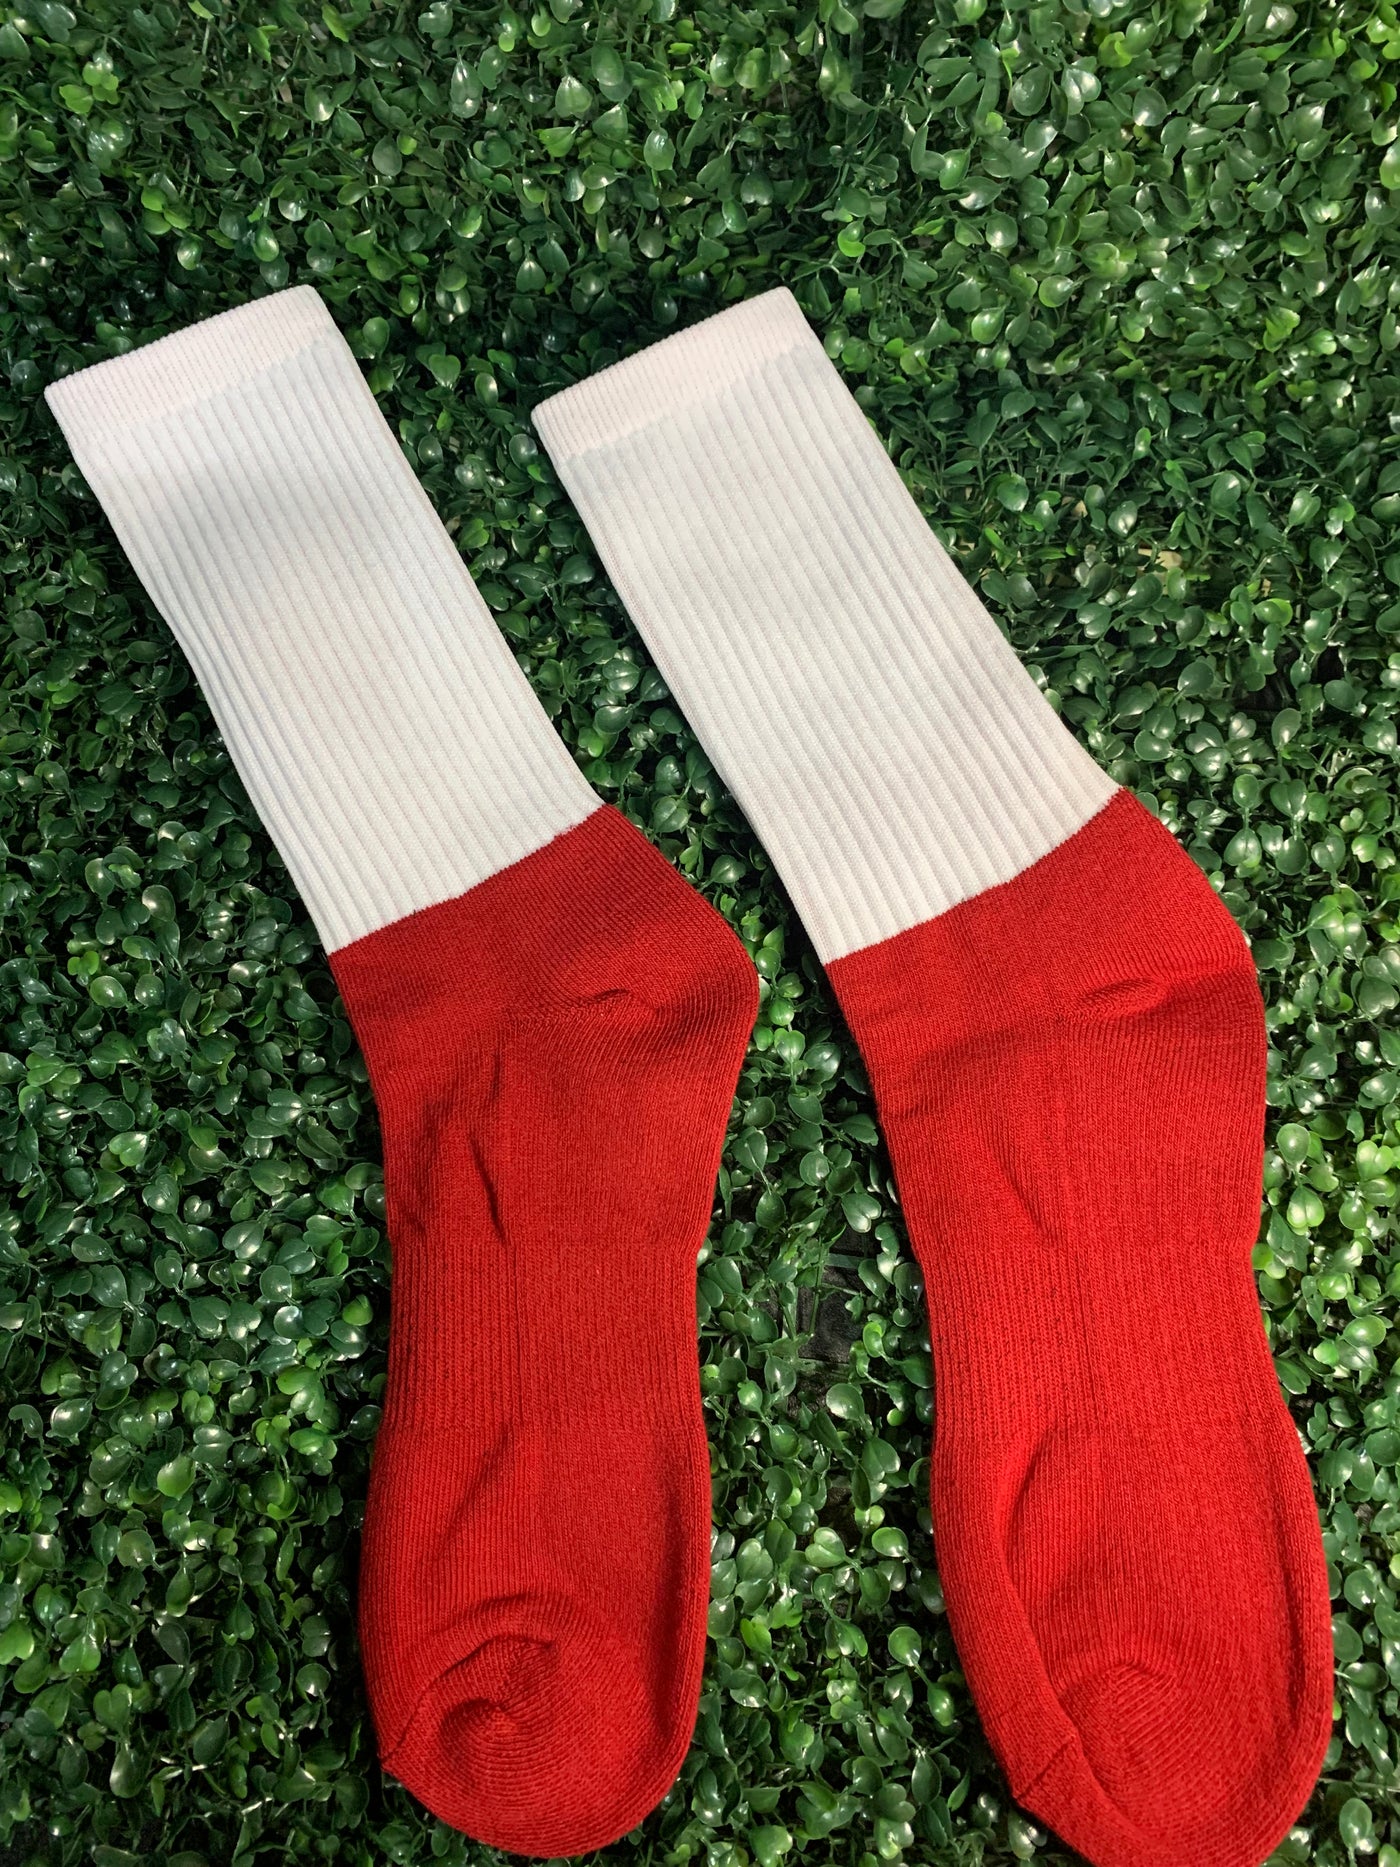 Sublimation Socks (Different Styles and Colors Available)